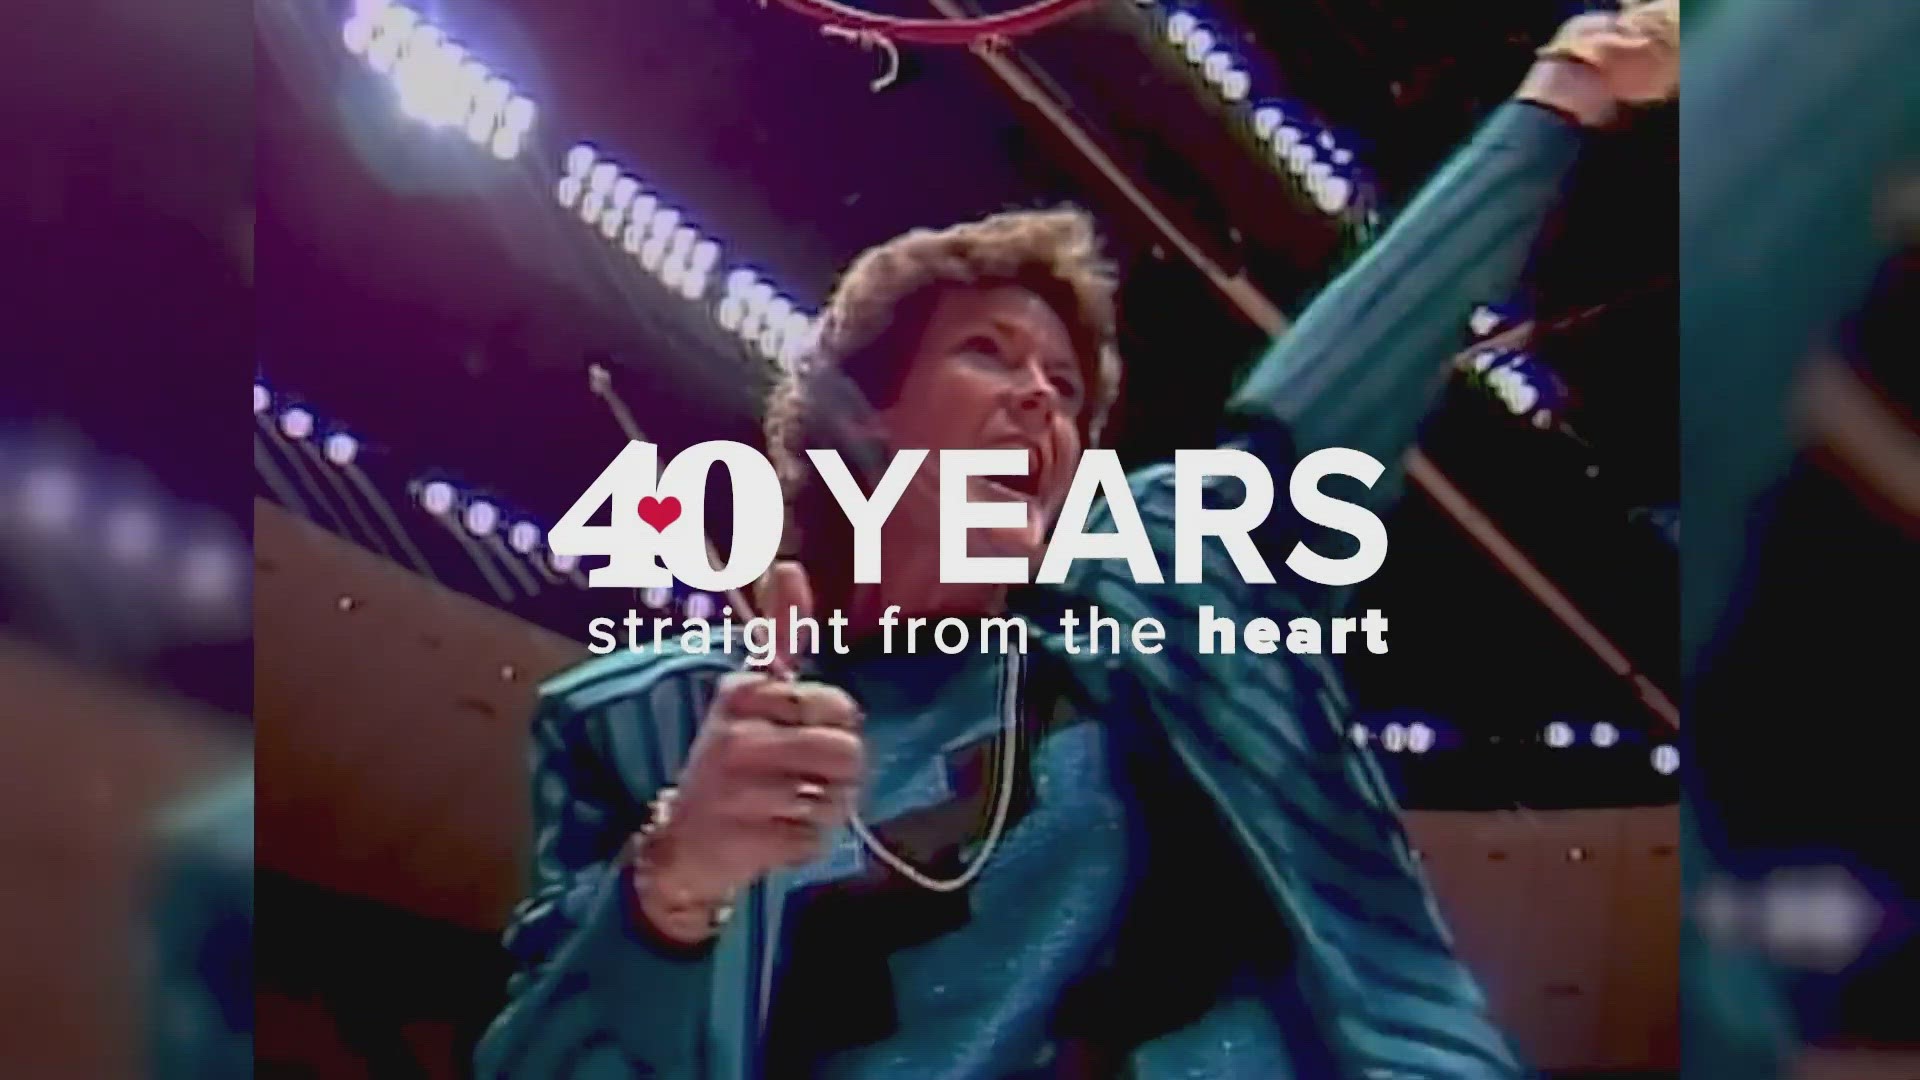 In 1983, "Straight from the Heart" was first used to promote WBIR Channel 10 to our community. In these 40 years, it's become the standard that we hold ourselves to.